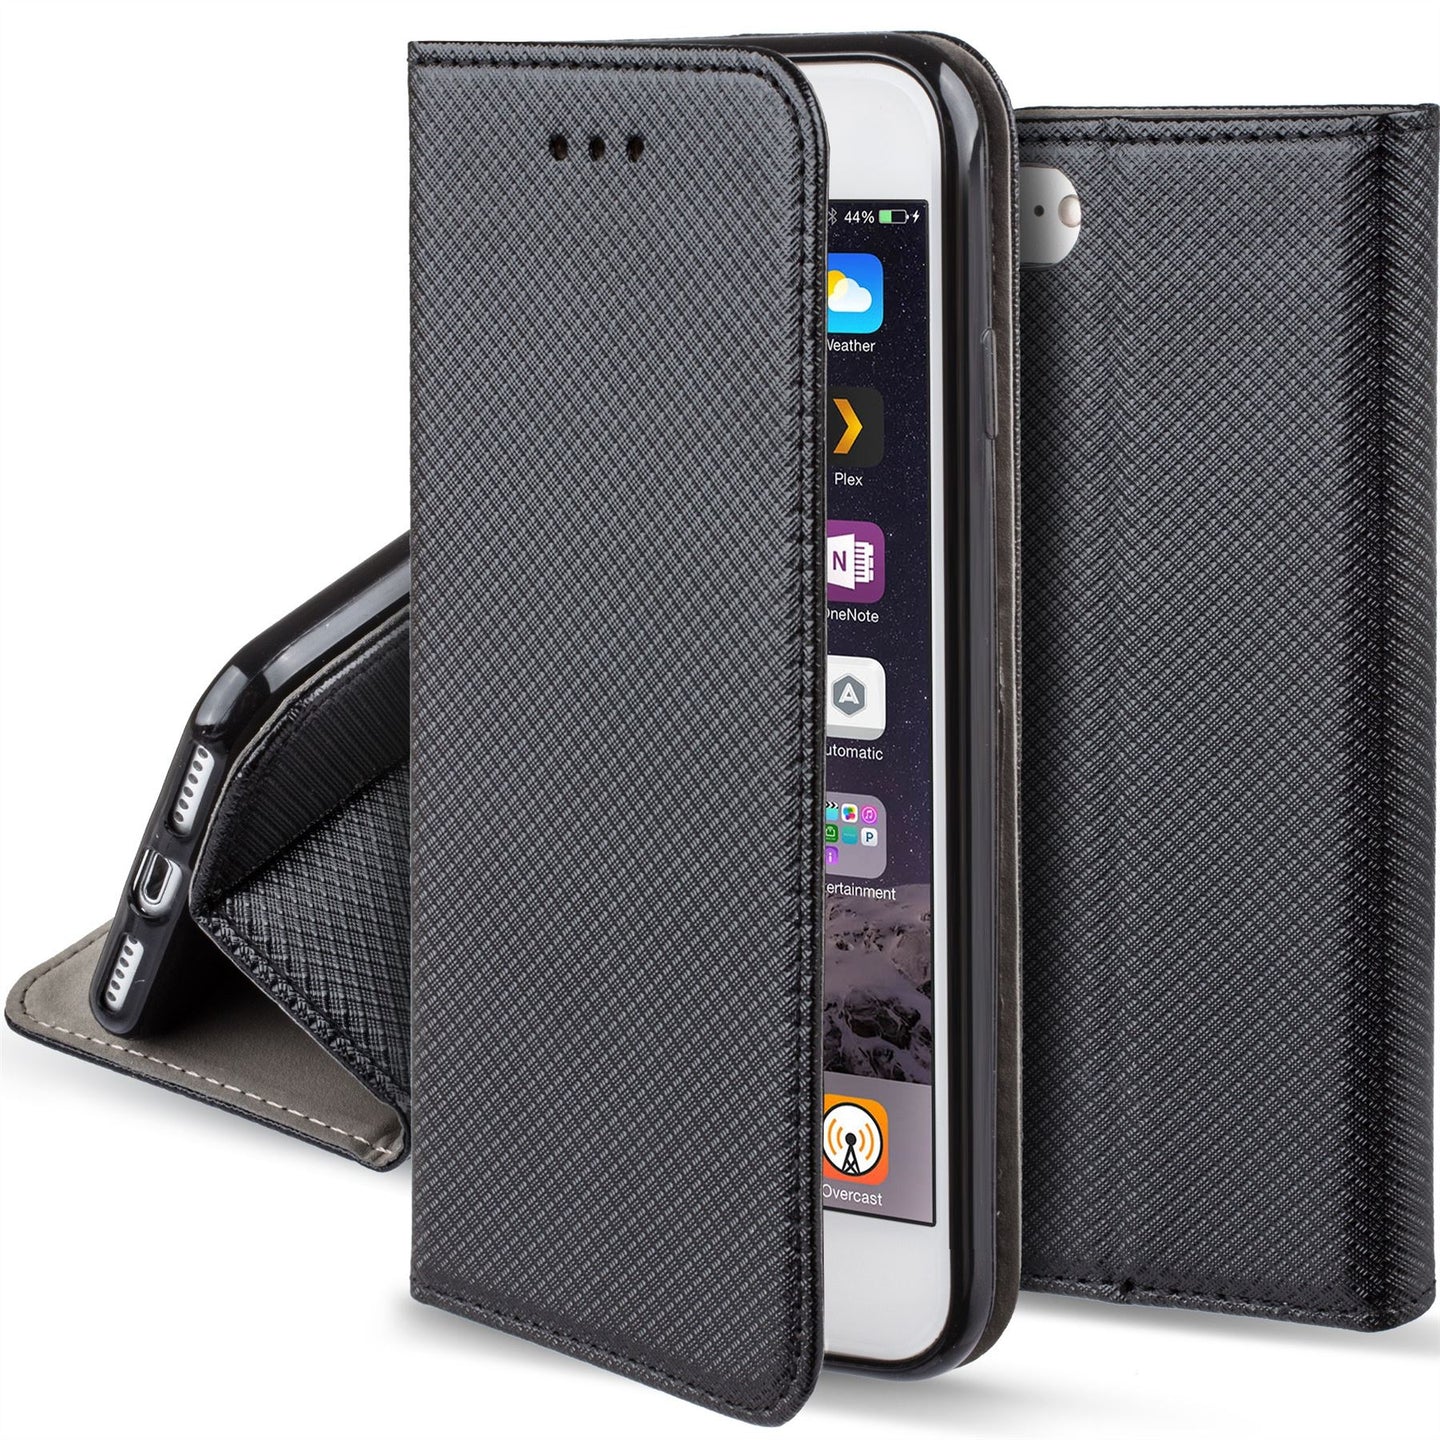 Moozy Case Flip Cover for iPhone SE, iPhone 5s, Black - Smart Magnetic Flip Case with Card Holder and Stand